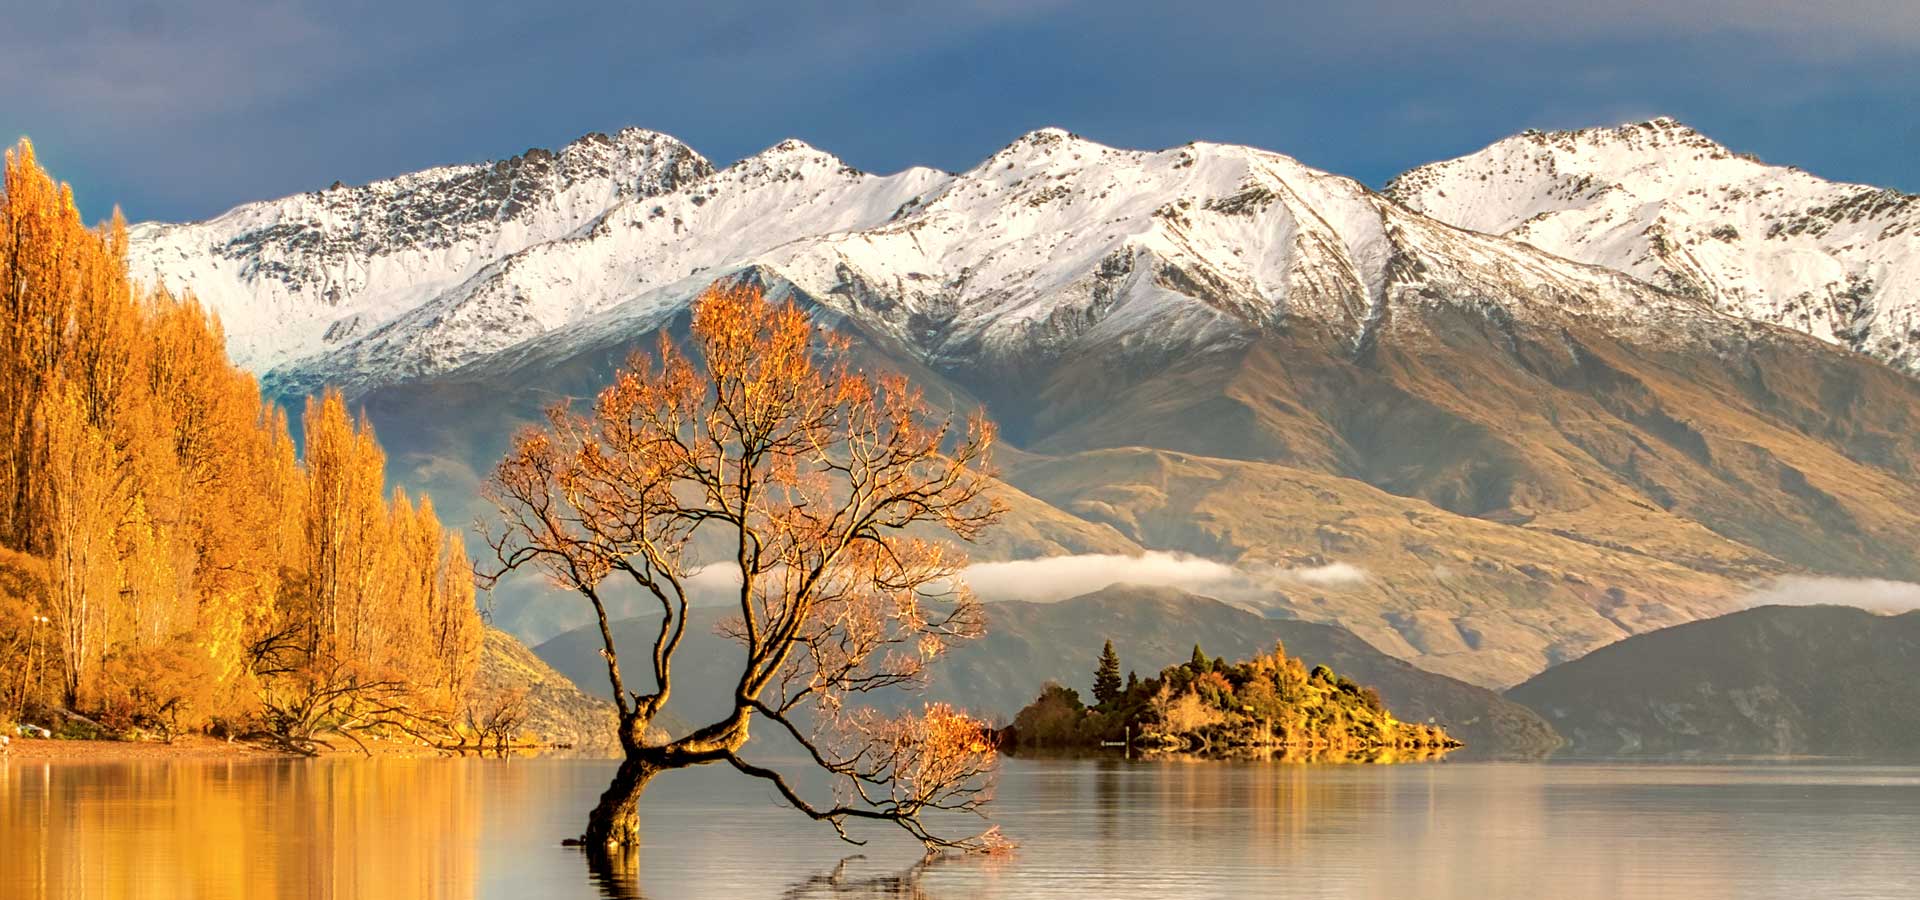 Rowing Tours New Zealand